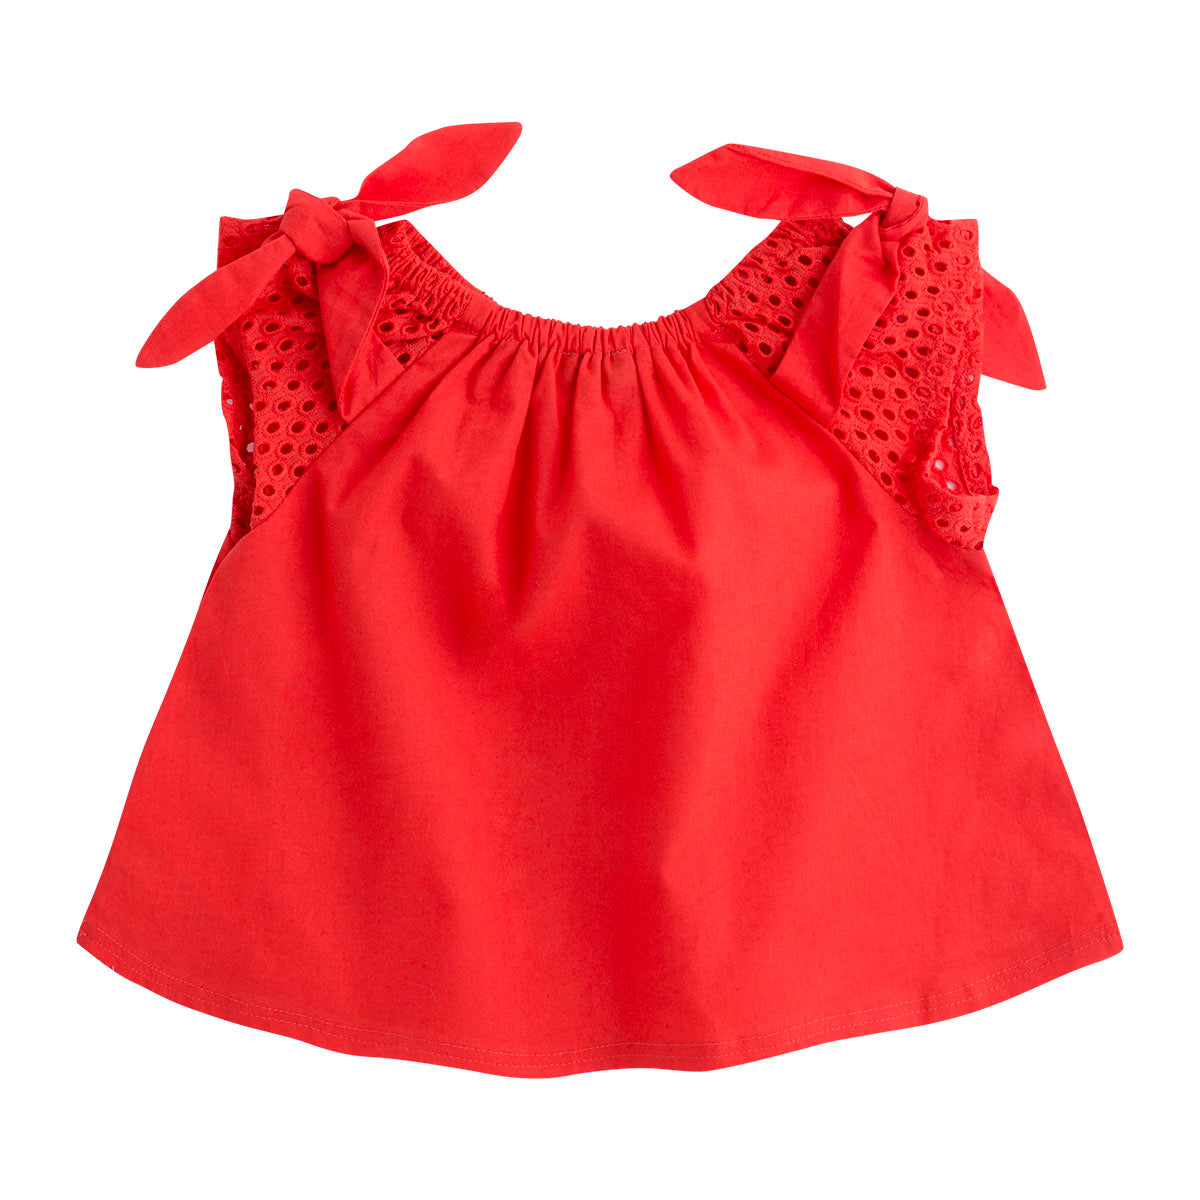 
  Top of the Canada House girl's clothing line, with perforated fabric shoulder straps
  and bows.
